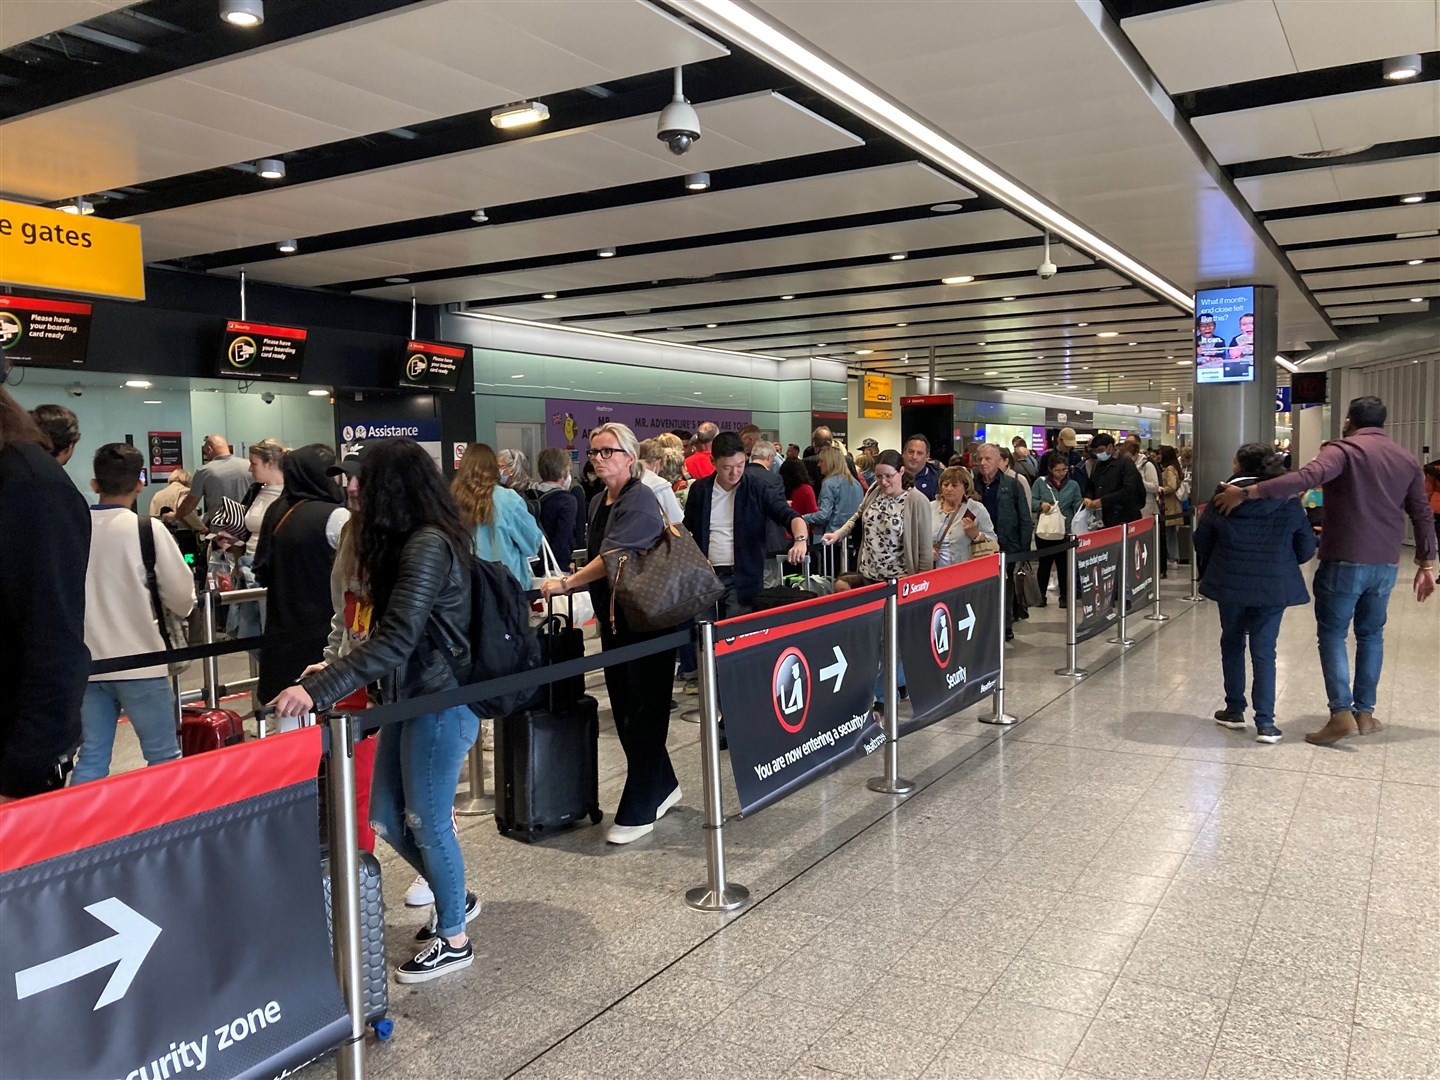 Thousands of flights have been cancelled and many passengers have been forced to wait for several hours in long queues at airports (Ben Smith/PA)